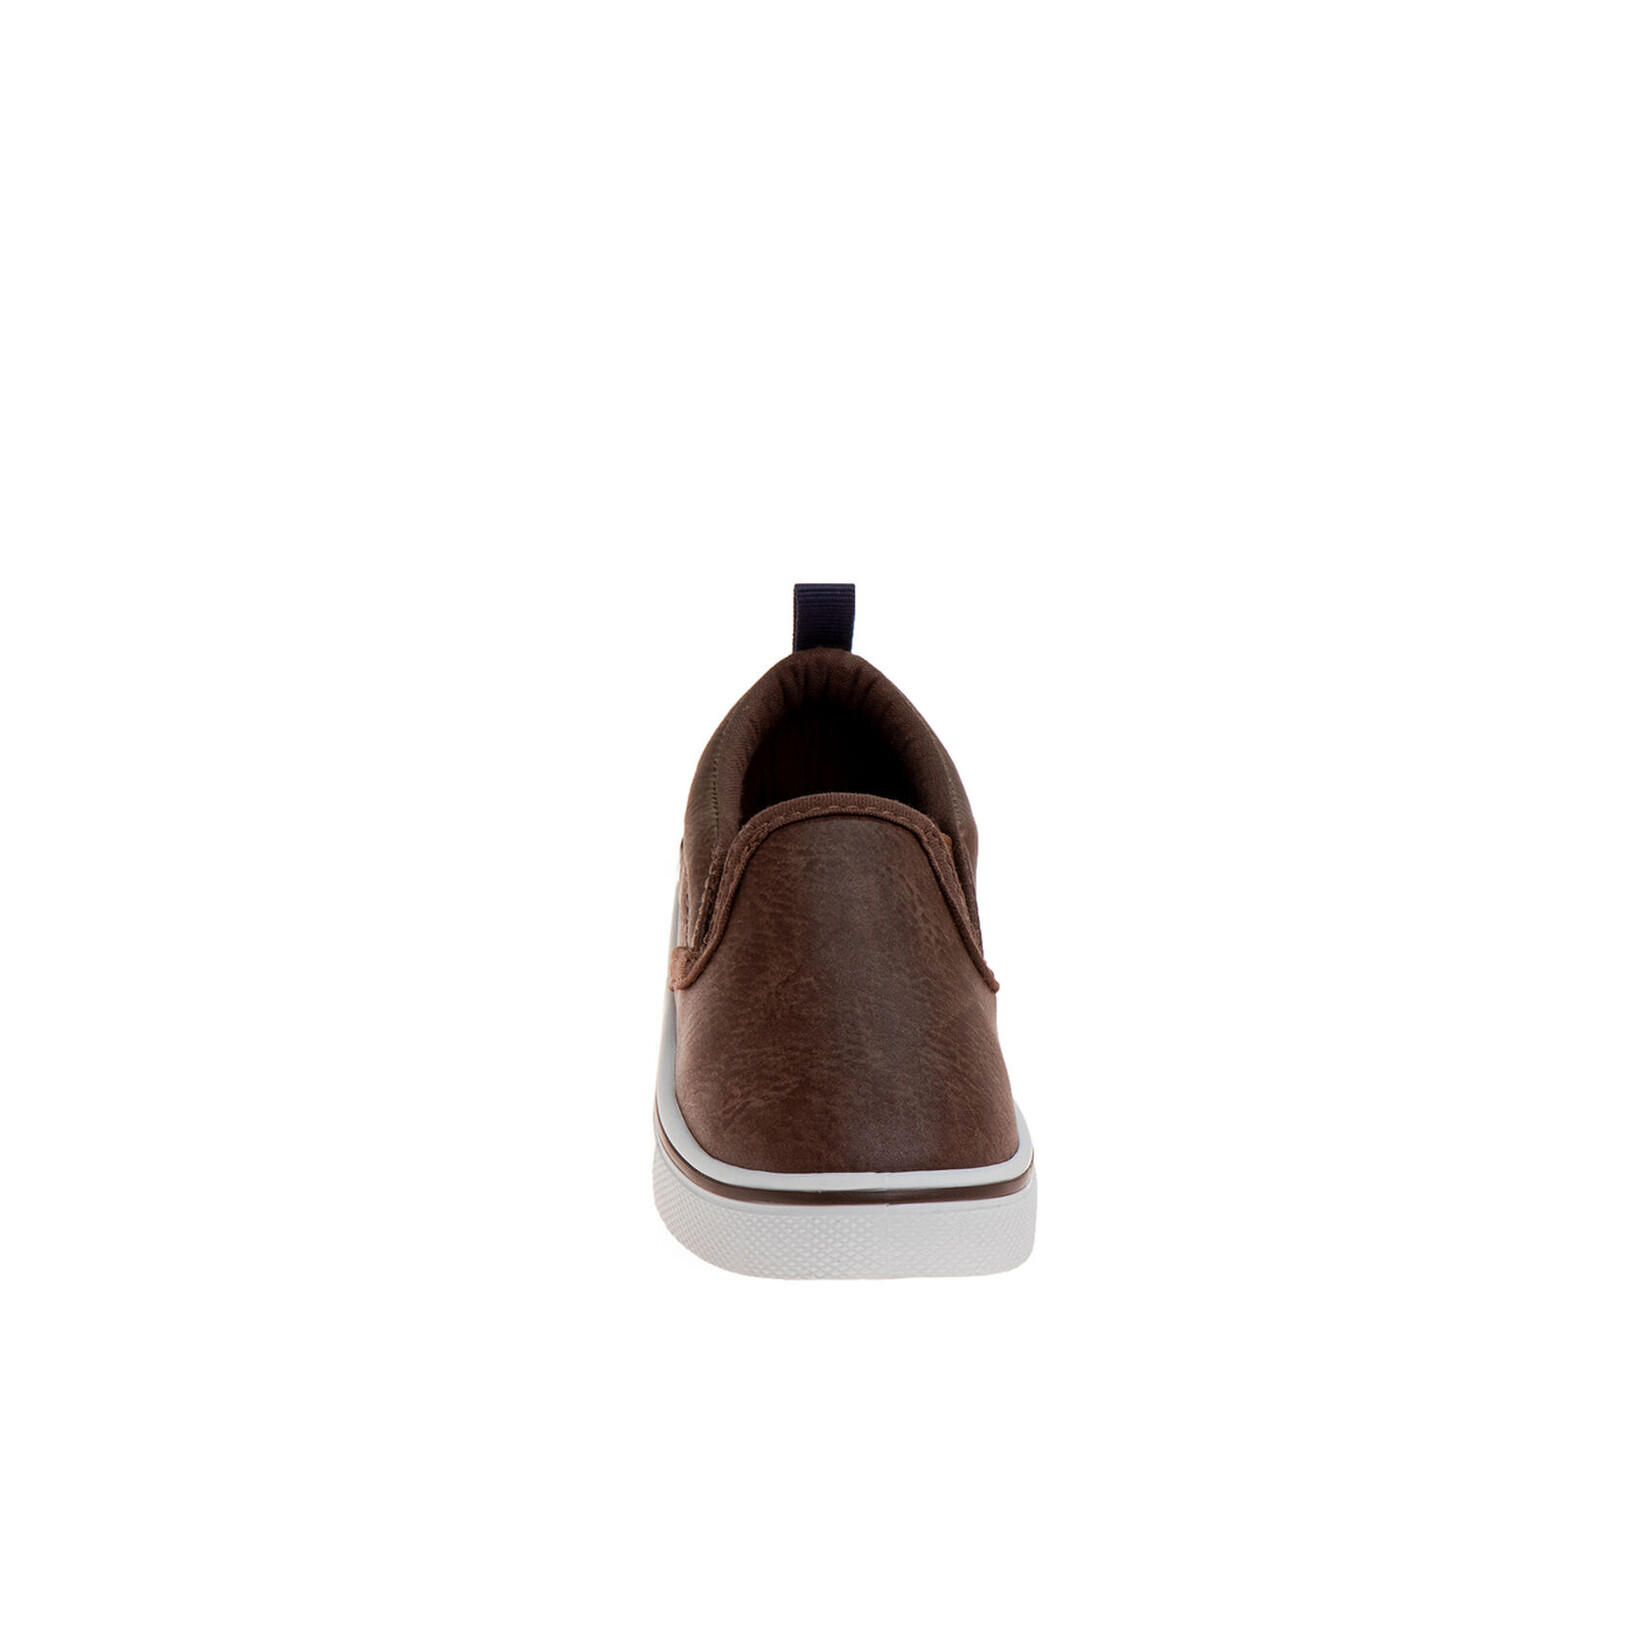 Beverly Hills Polo Club Boys Slip-On Canvas Sneakers - BH89913H